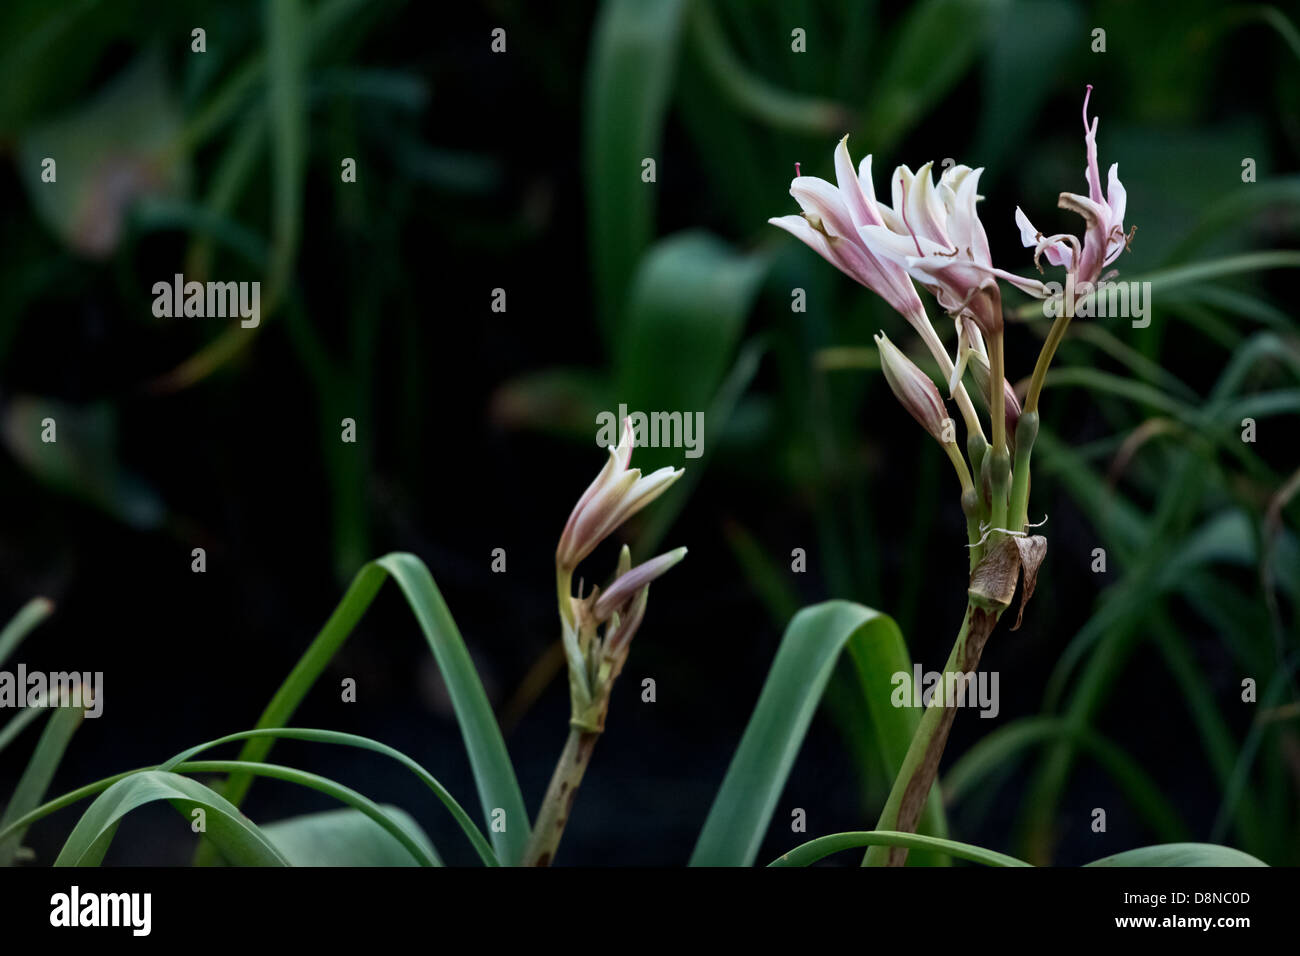 Blooms of a wild lily with dark foliage in background Stock Photo